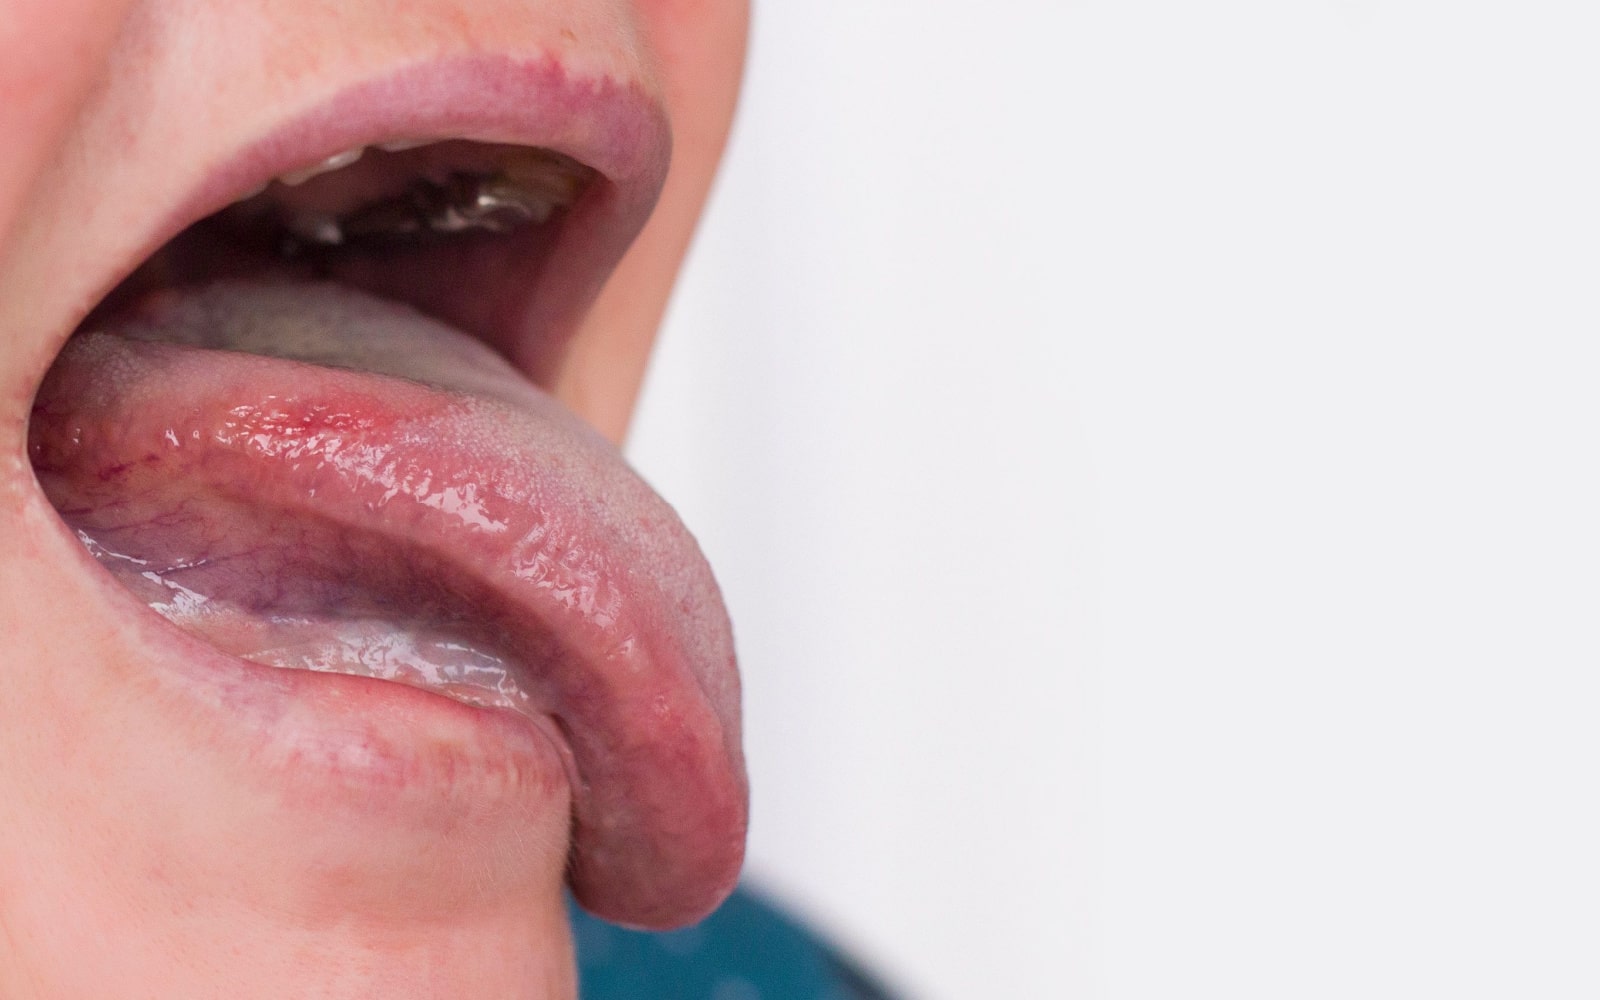 Person with oral lichen planus on their tongue and mouth